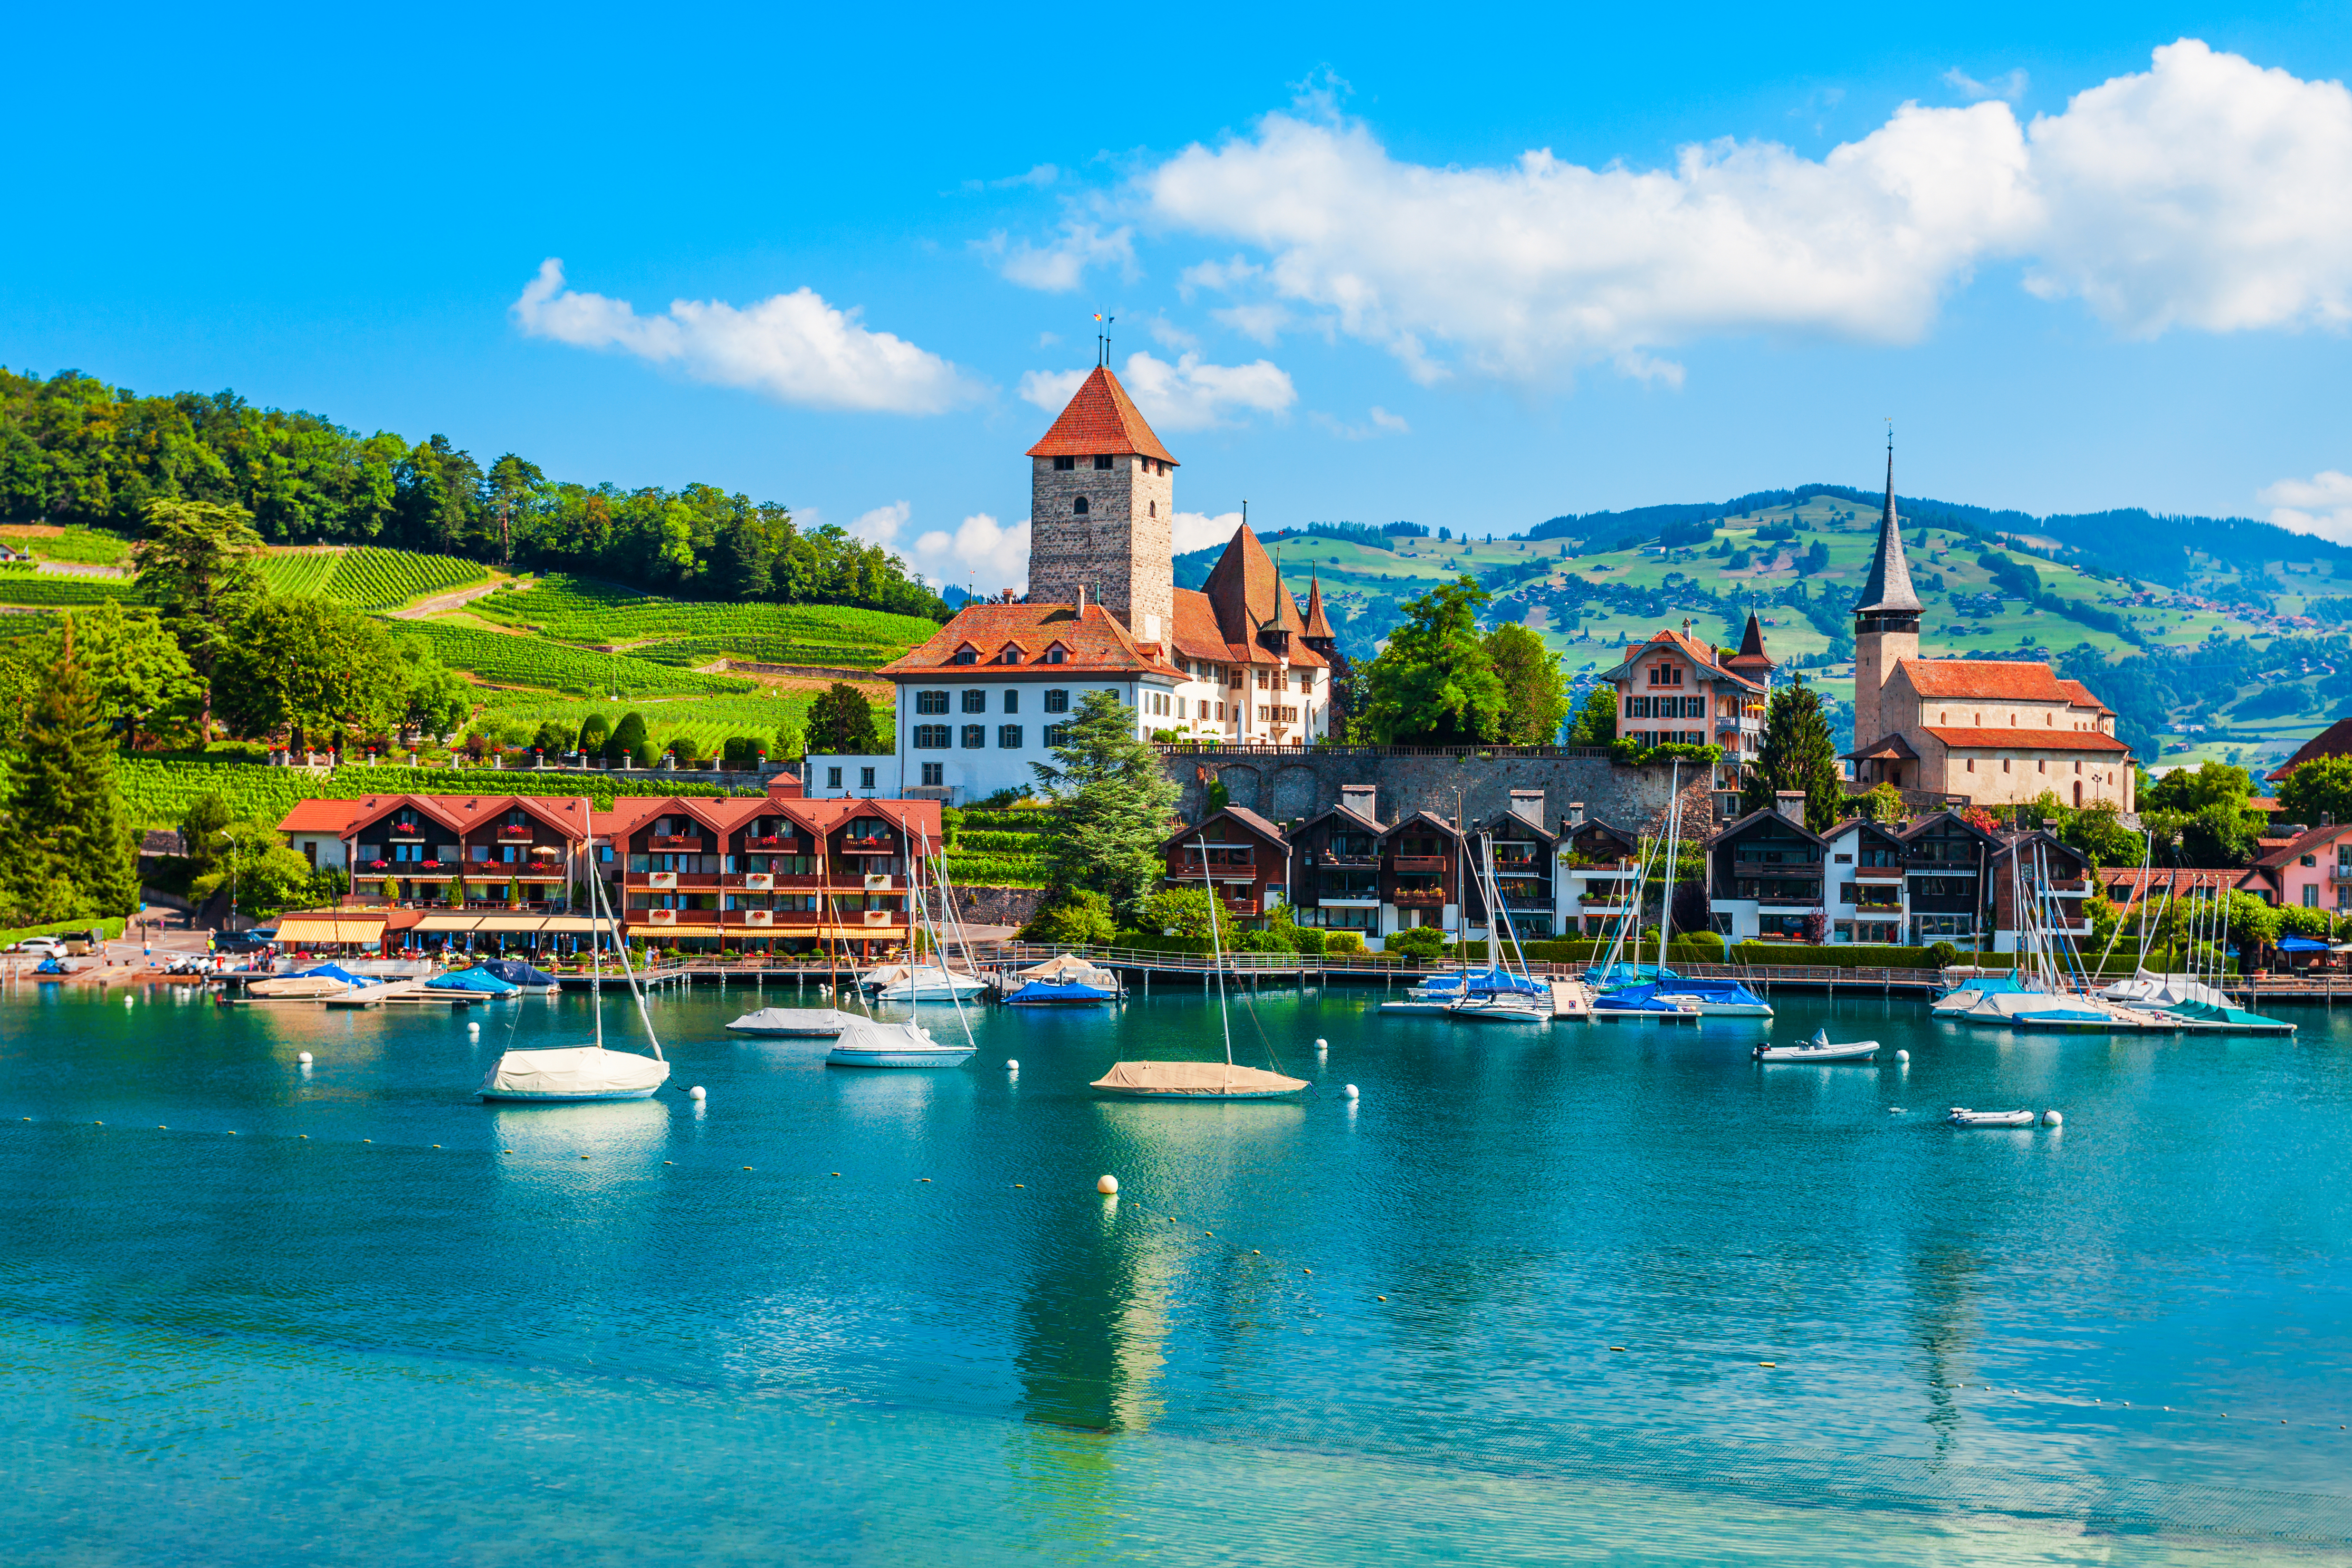 Swiss residence permit allows foreigners to live in a beautiful country